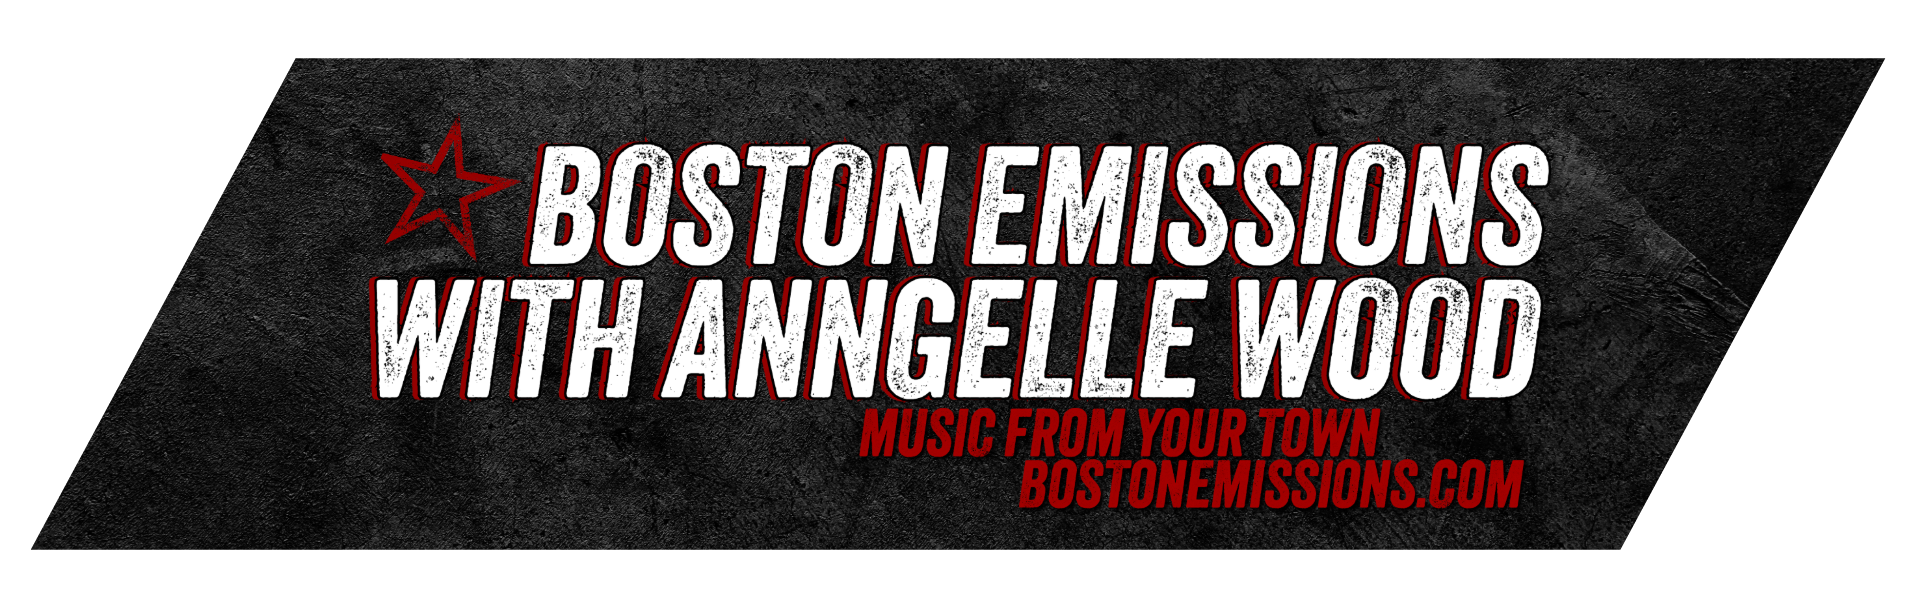 Boston Emissions with Anngelle Wood